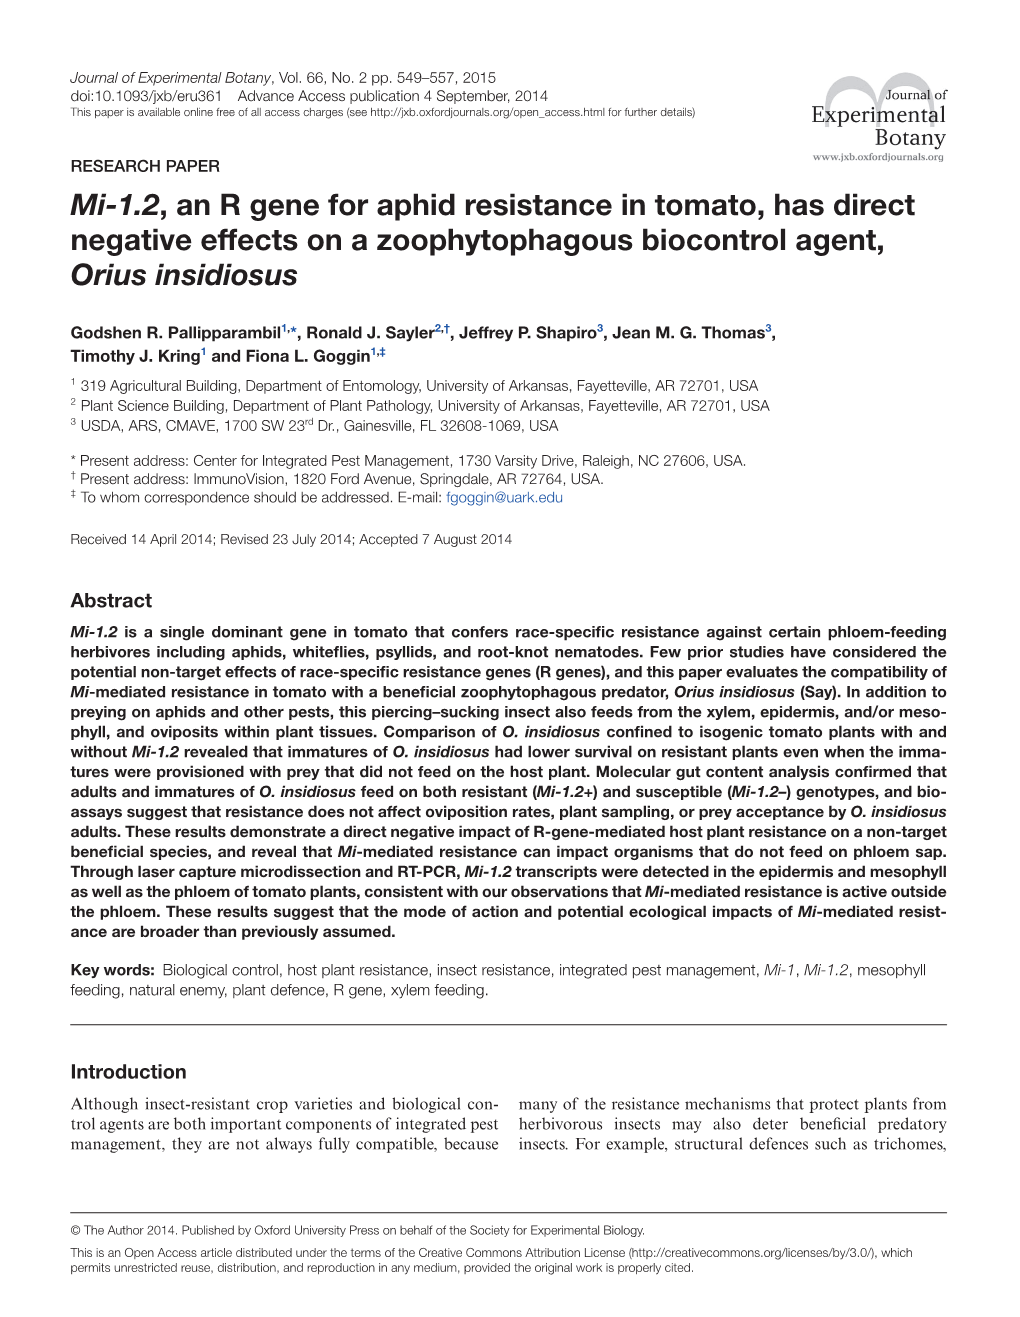 Mi-1.2, an R Gene for Aphid Resistance in Tomato, Has Direct Negative Effects on a Zoophytophagous Biocontrol Agent, Orius Insidiosus